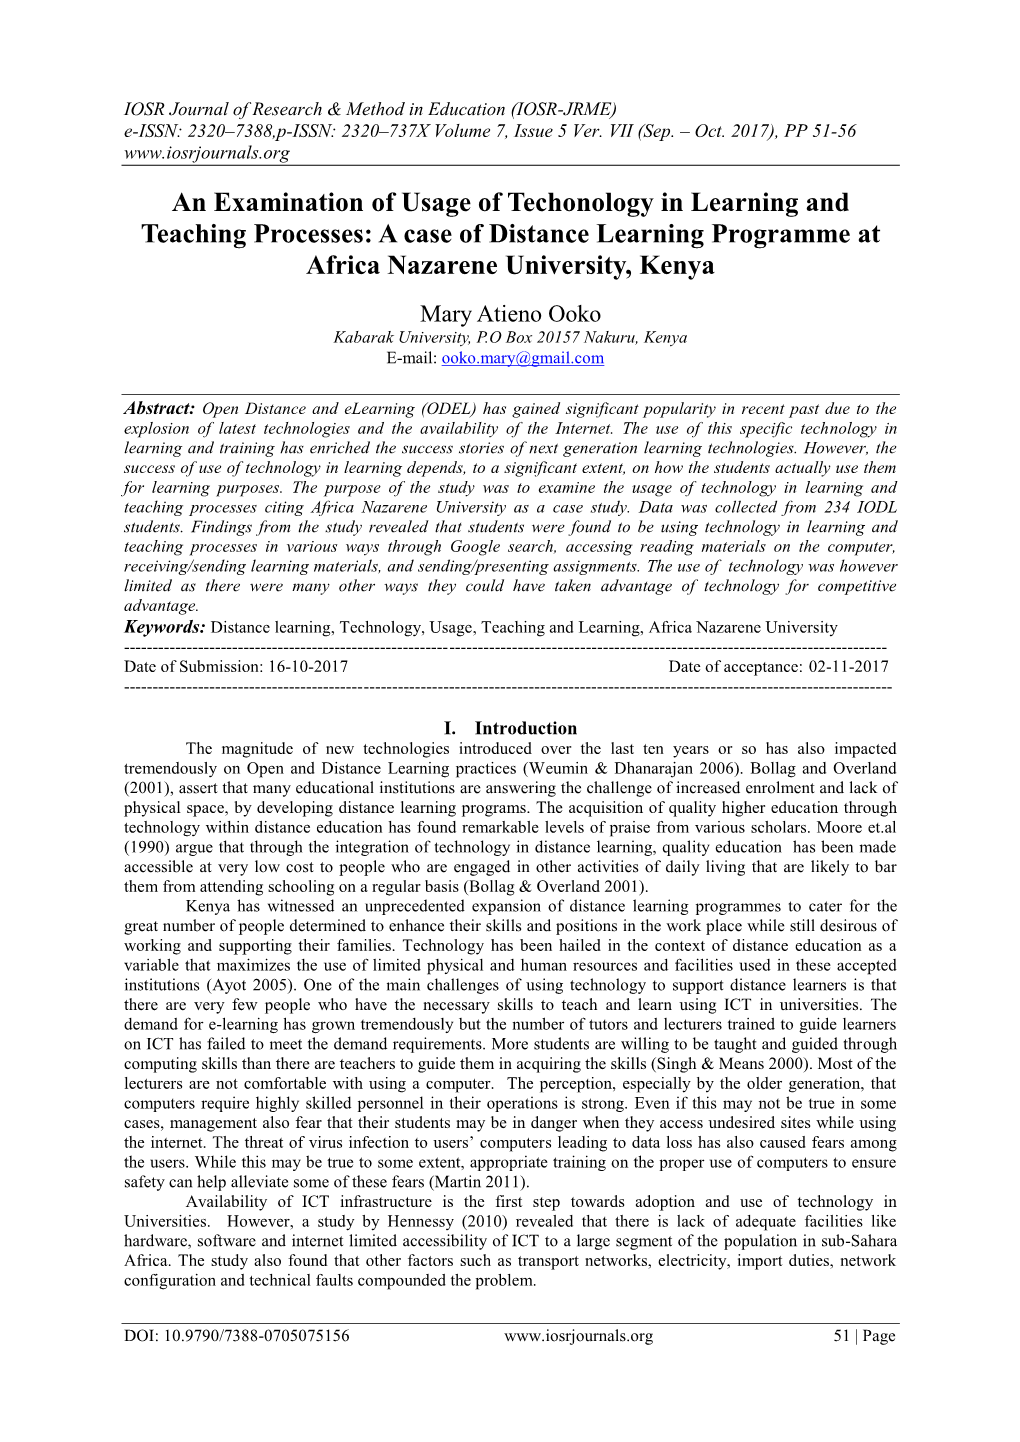 An Examination of Usage of Techonology in Learning and Teaching Processes: a Case of Distance Learning Programme at Africa Nazarene University, Kenya